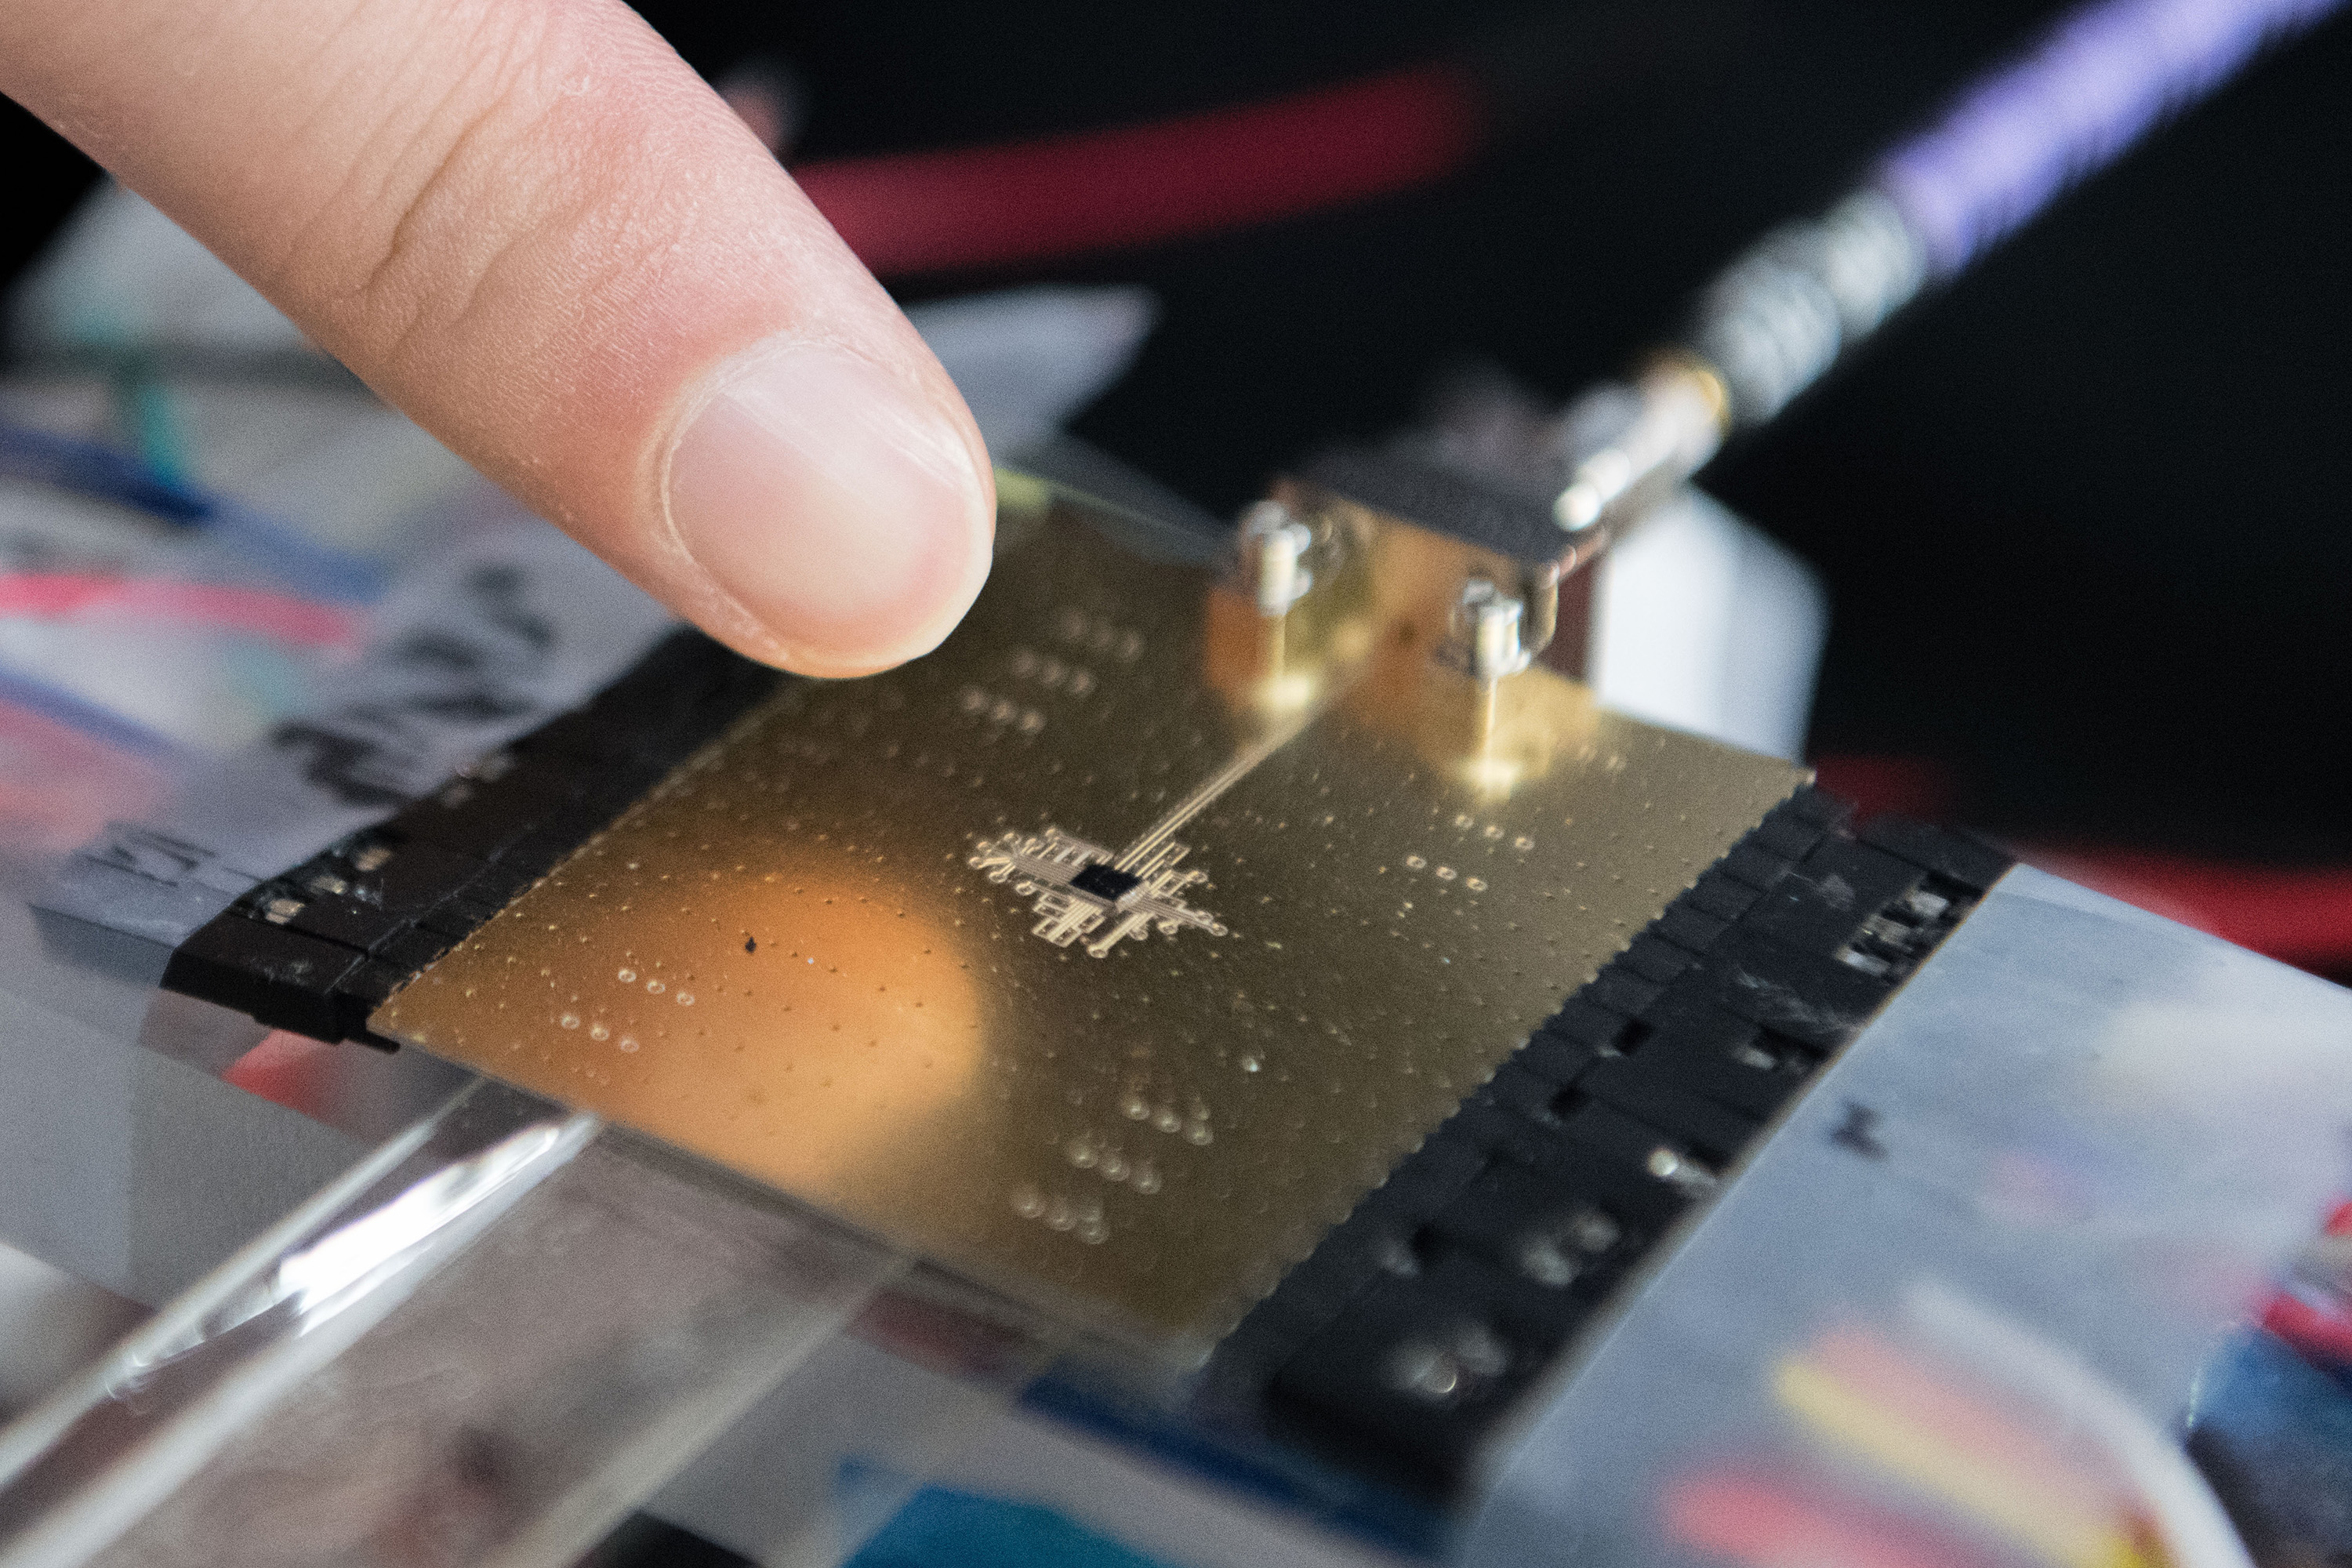 Image shows one of the packaged millimeter wave transmitters with antenna-electronics co-designed collaboratively by the Georgia Tech researchers. The ultra-miniaturized IC chip contains on-chip antenna and all the required electronics for millimeter wave signal generation and transmitting. Multiple IC chips can be tiled together to form a large array for 5G MIMO applications. (Credit: Allison Carter, Georgia Tech)